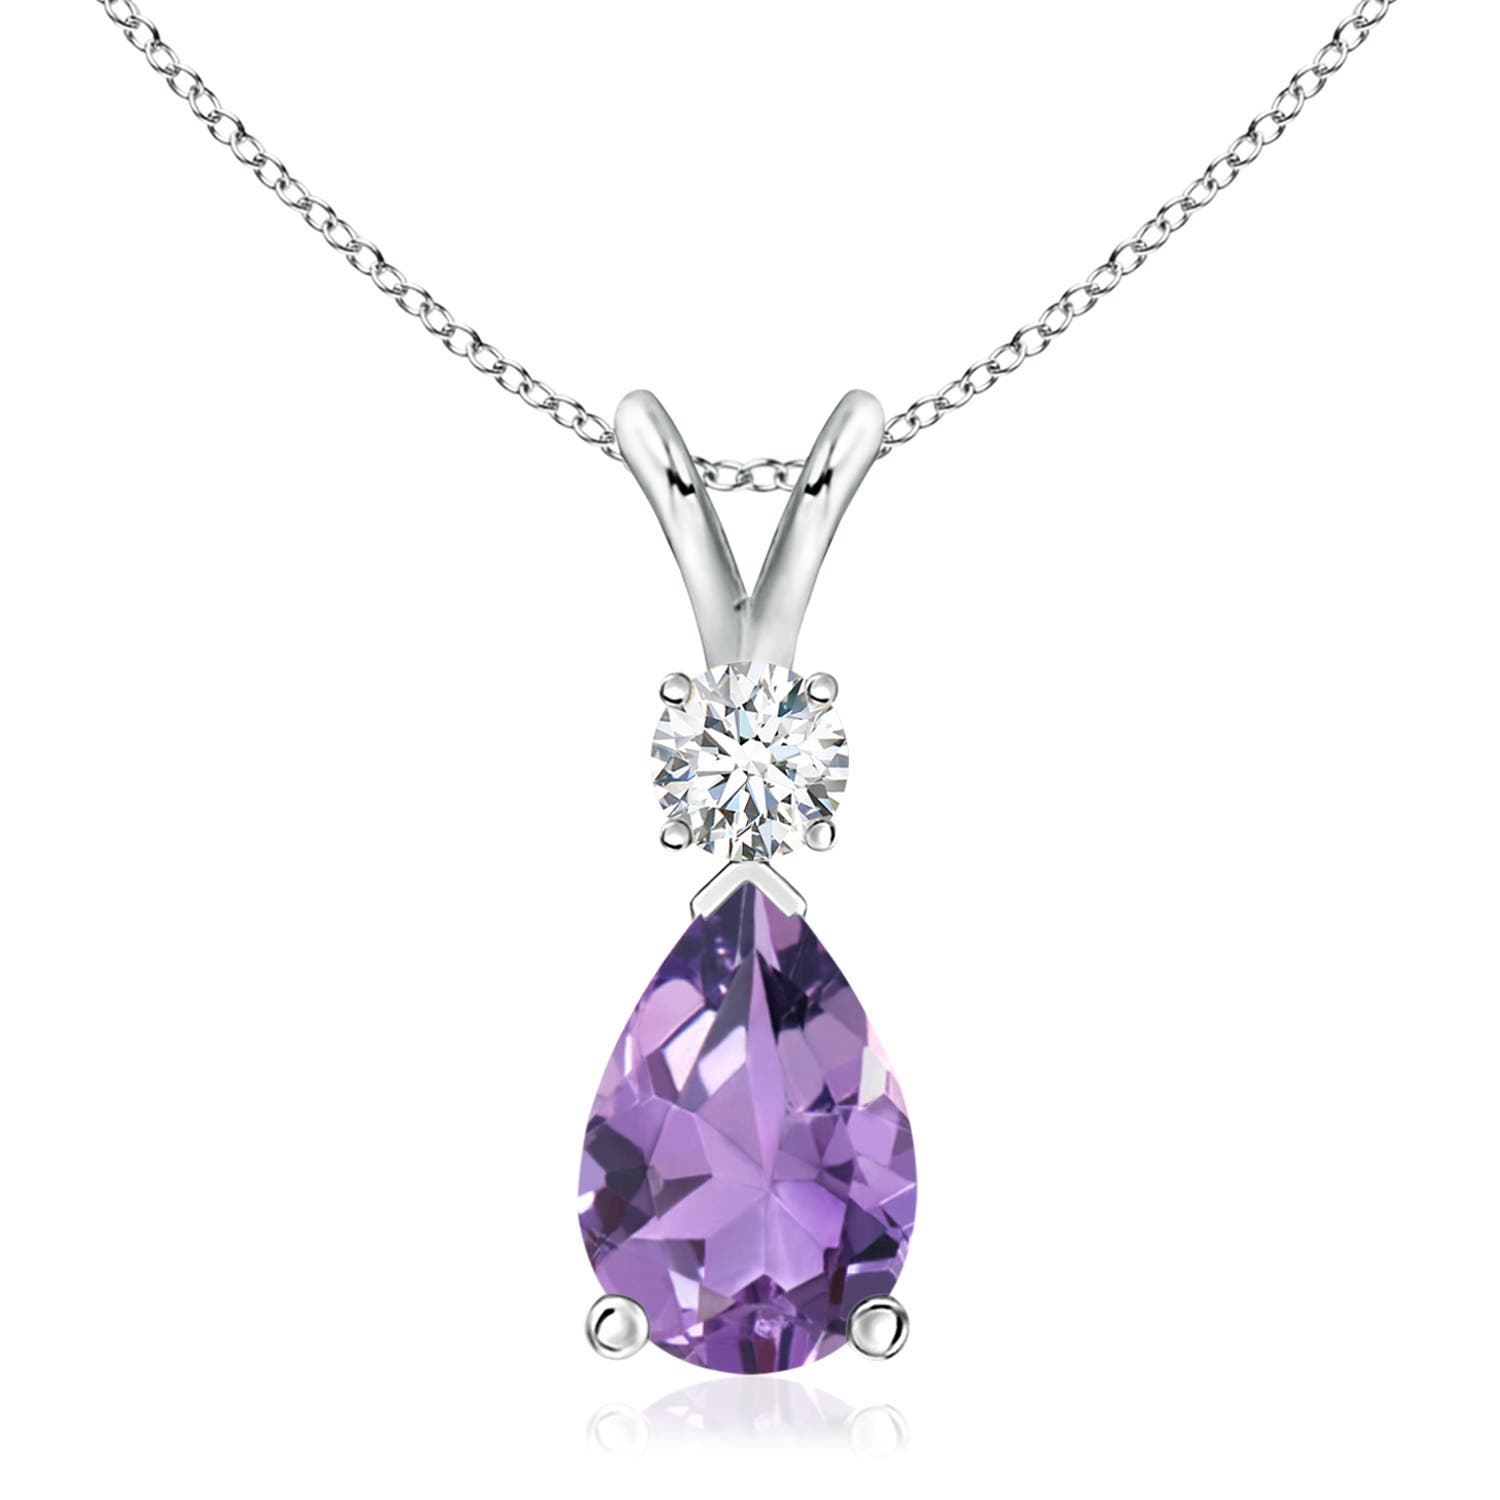 A - Amethyst / 2.78 CT / 14 KT White Gold